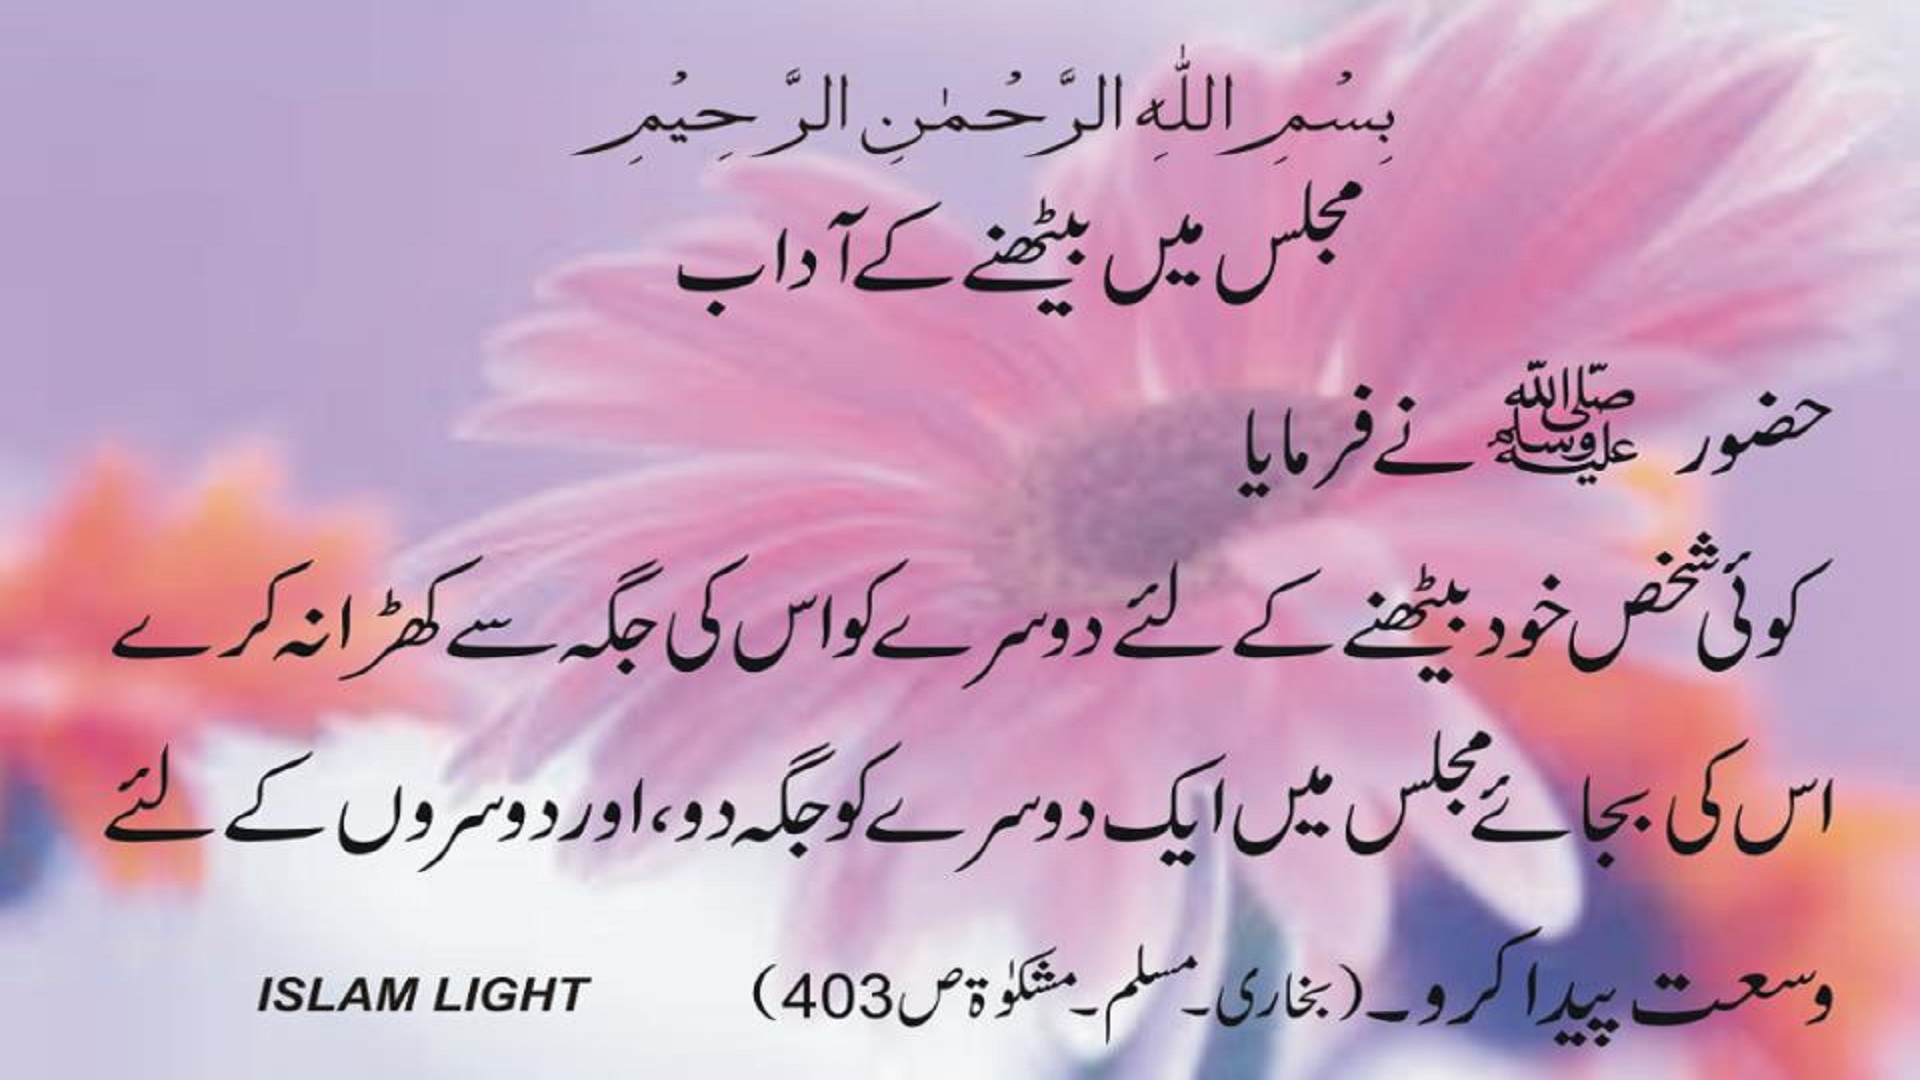 🔥 Download Best All Hadees HD Wallpaper For Desktop by @bshannon7 | Hadees  Wallpapers, Hadees Wallpapers,